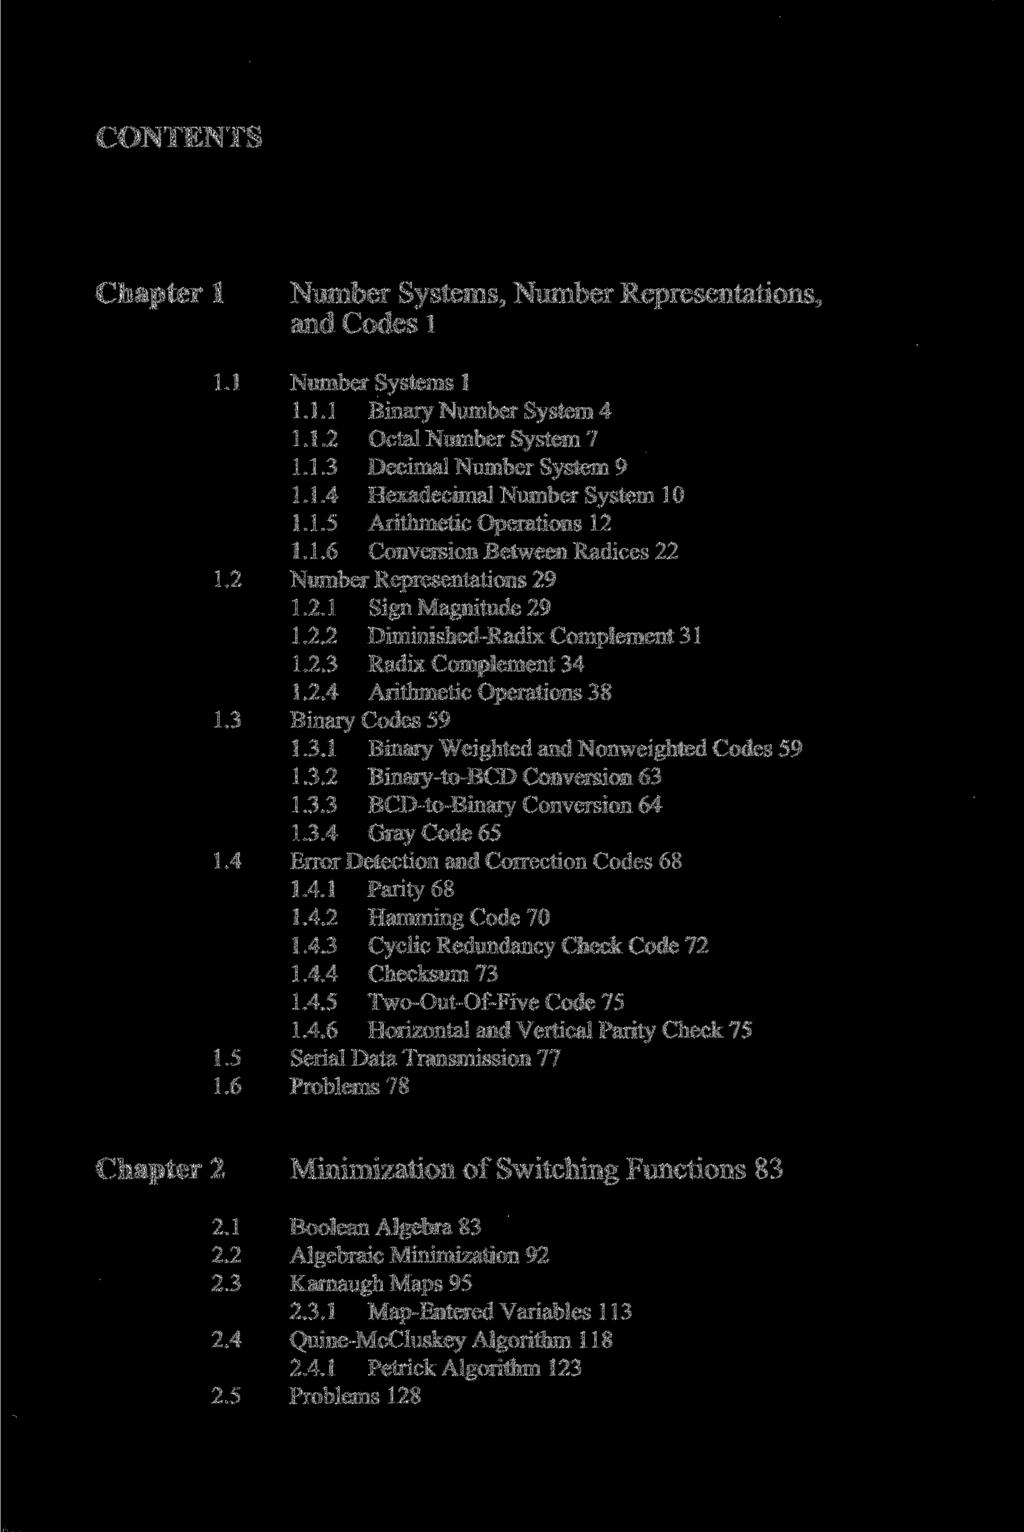 CONTENTS Chapter 1 1.1 1.2 1.3 1.4 1.5 1.6 Number Systems, Number Representations, and Codes 1 Number Systems 1 1.1.1 Binary Number System 4 1.1.2 Octal Number System 7 1.1.3 Decimal Number System 9 1.